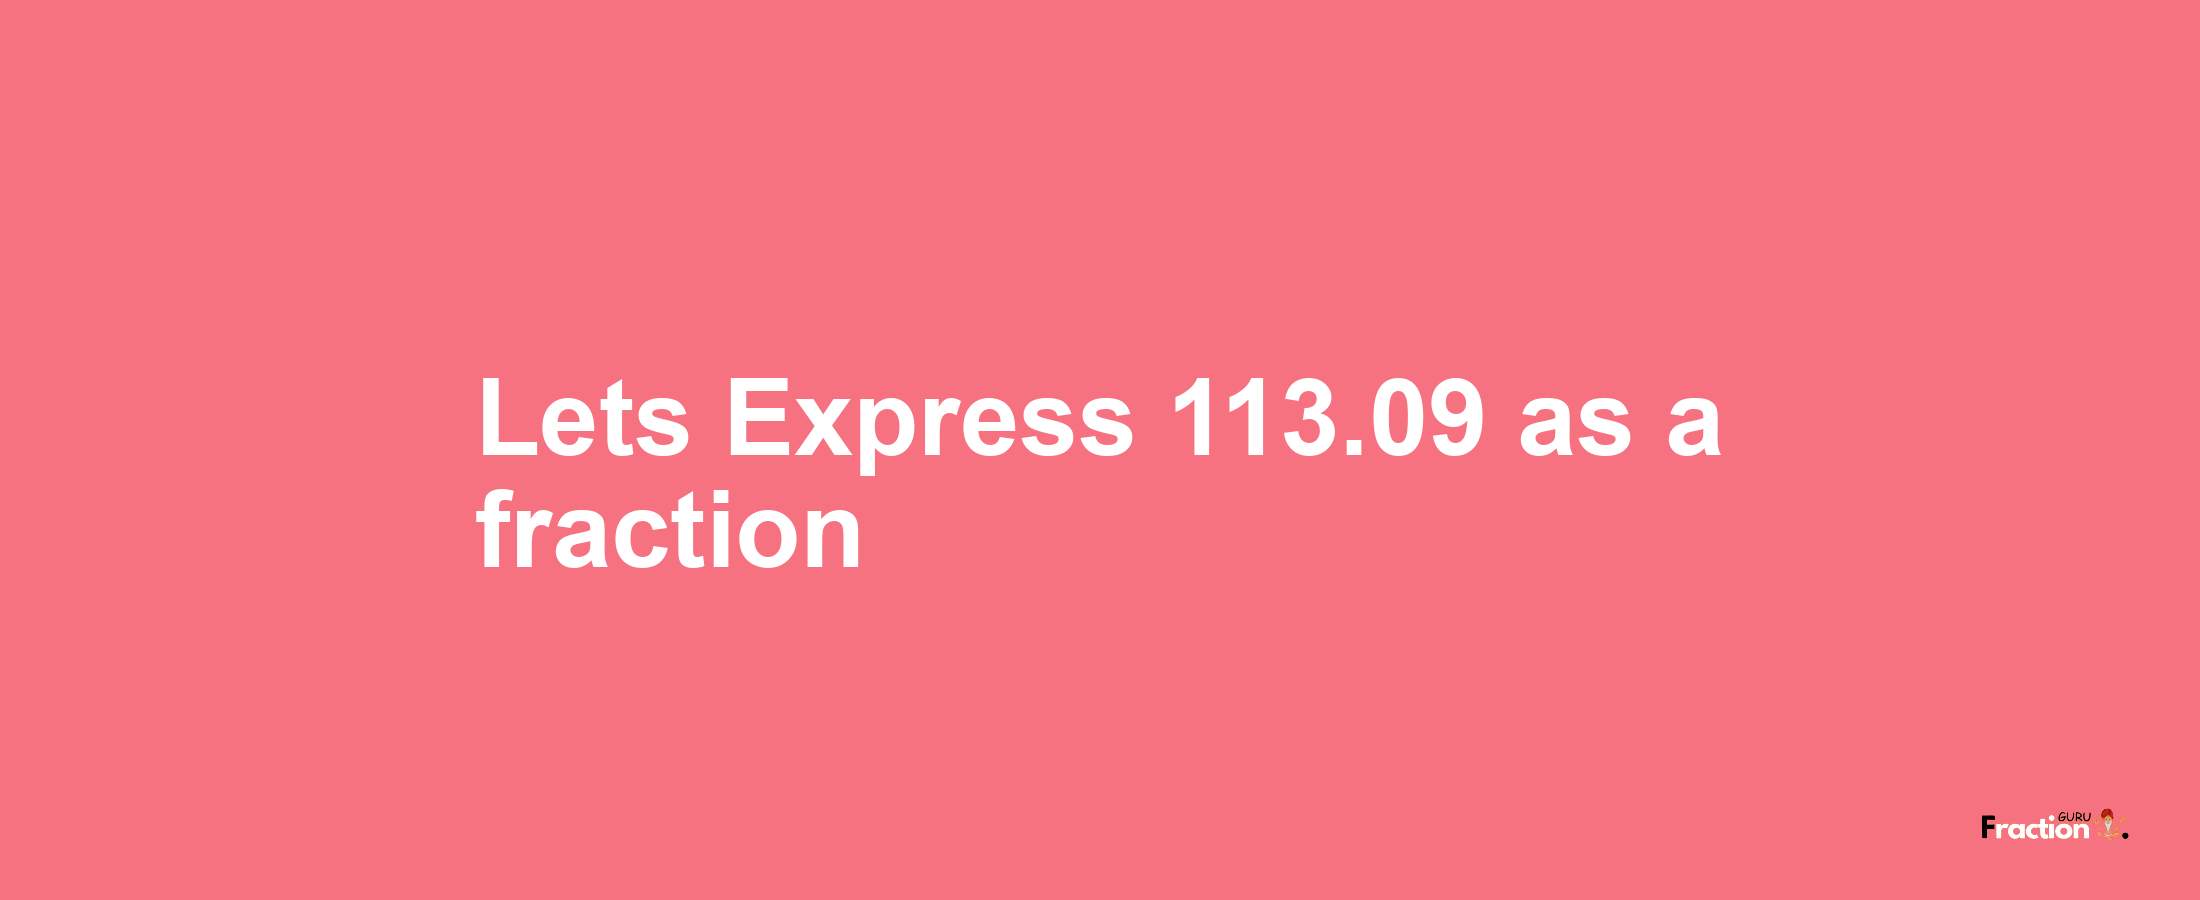 Lets Express 113.09 as afraction